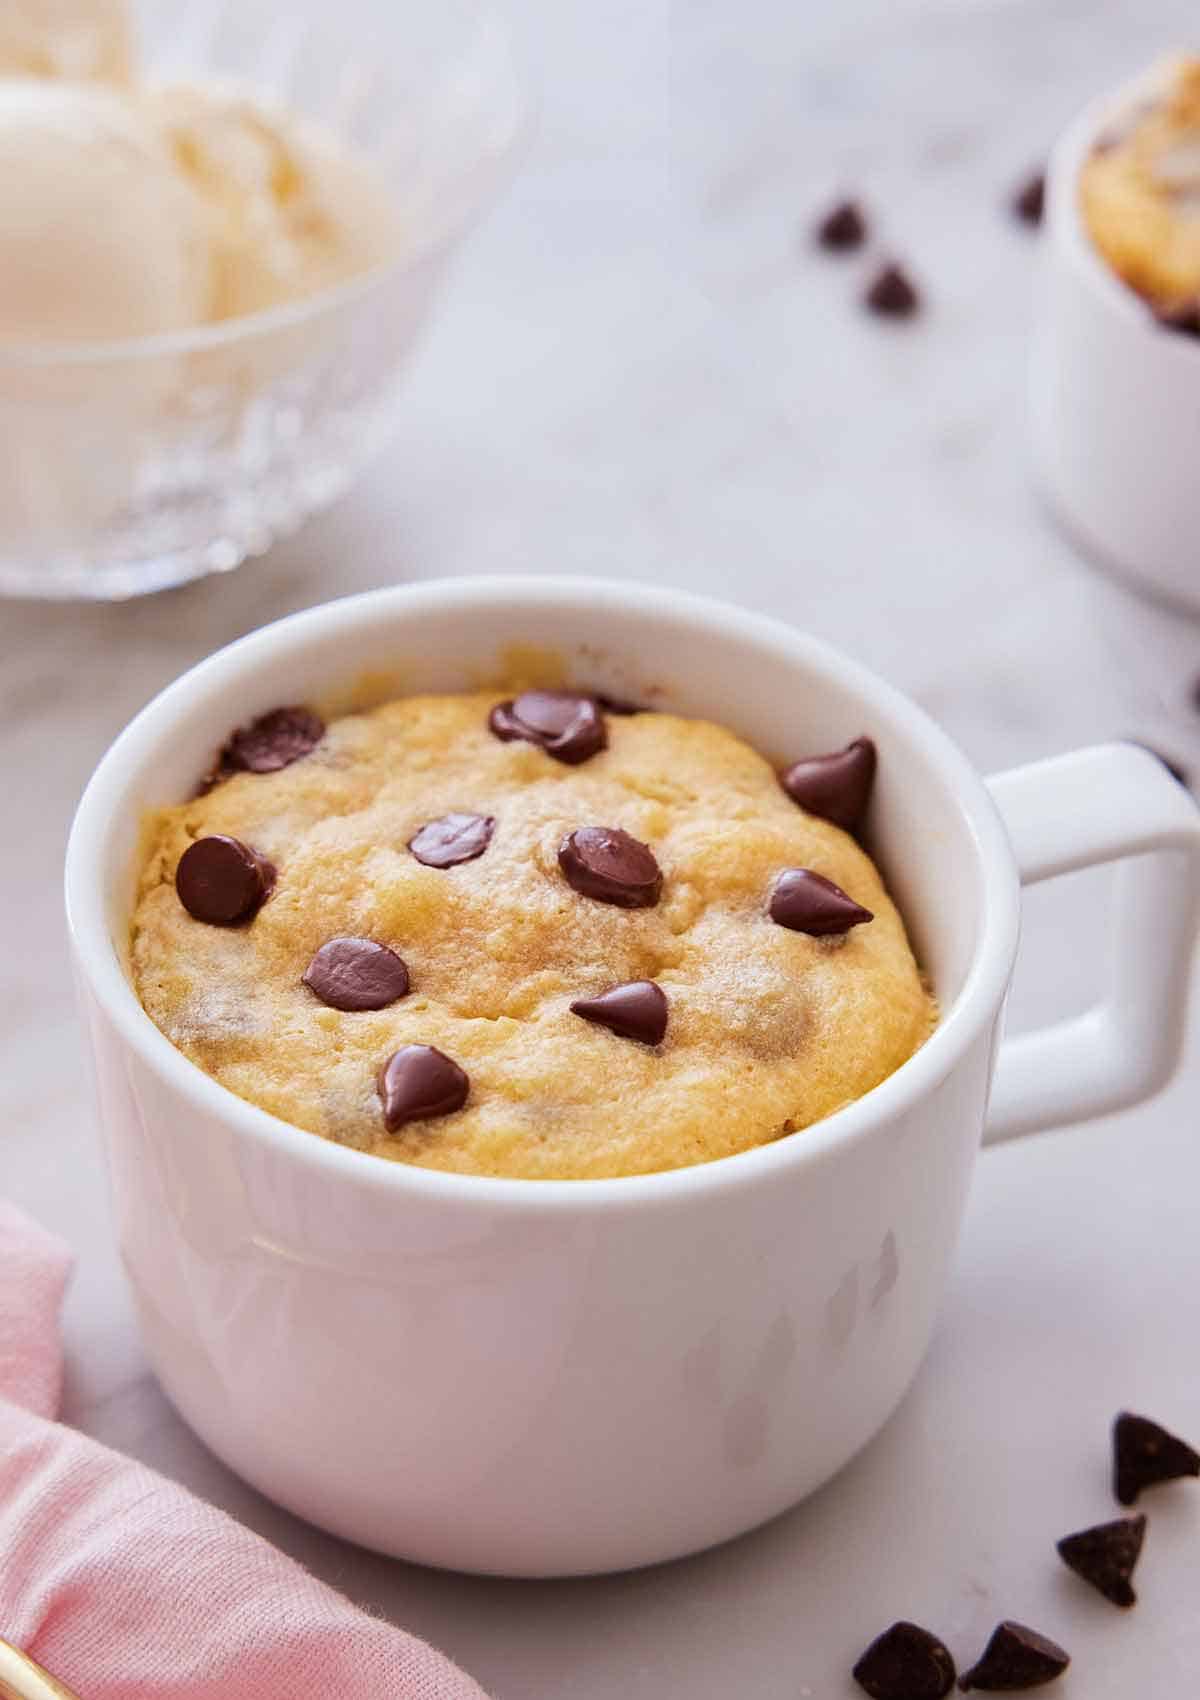 A cookie in a mug with chocolate chips scattered around.